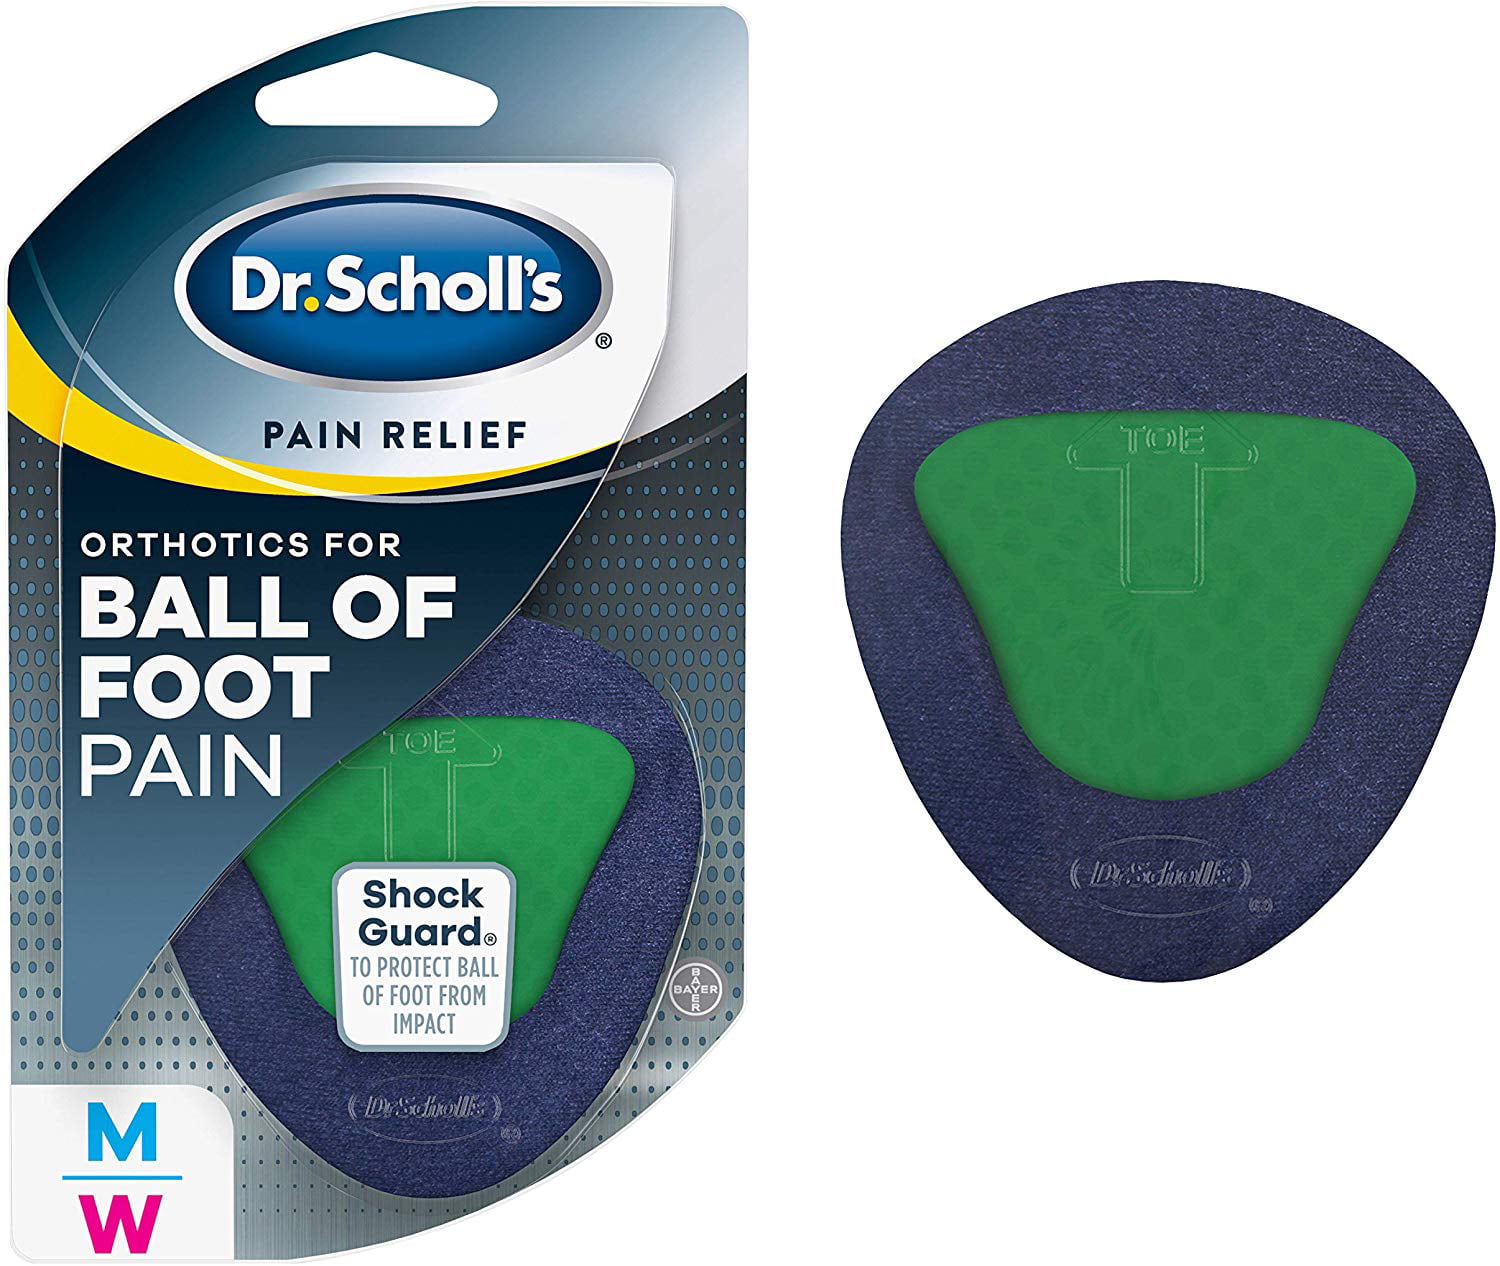 Dr. Scholl's Pain Relief Orthotics for Ball of Foot Pain, 1 Pair, One